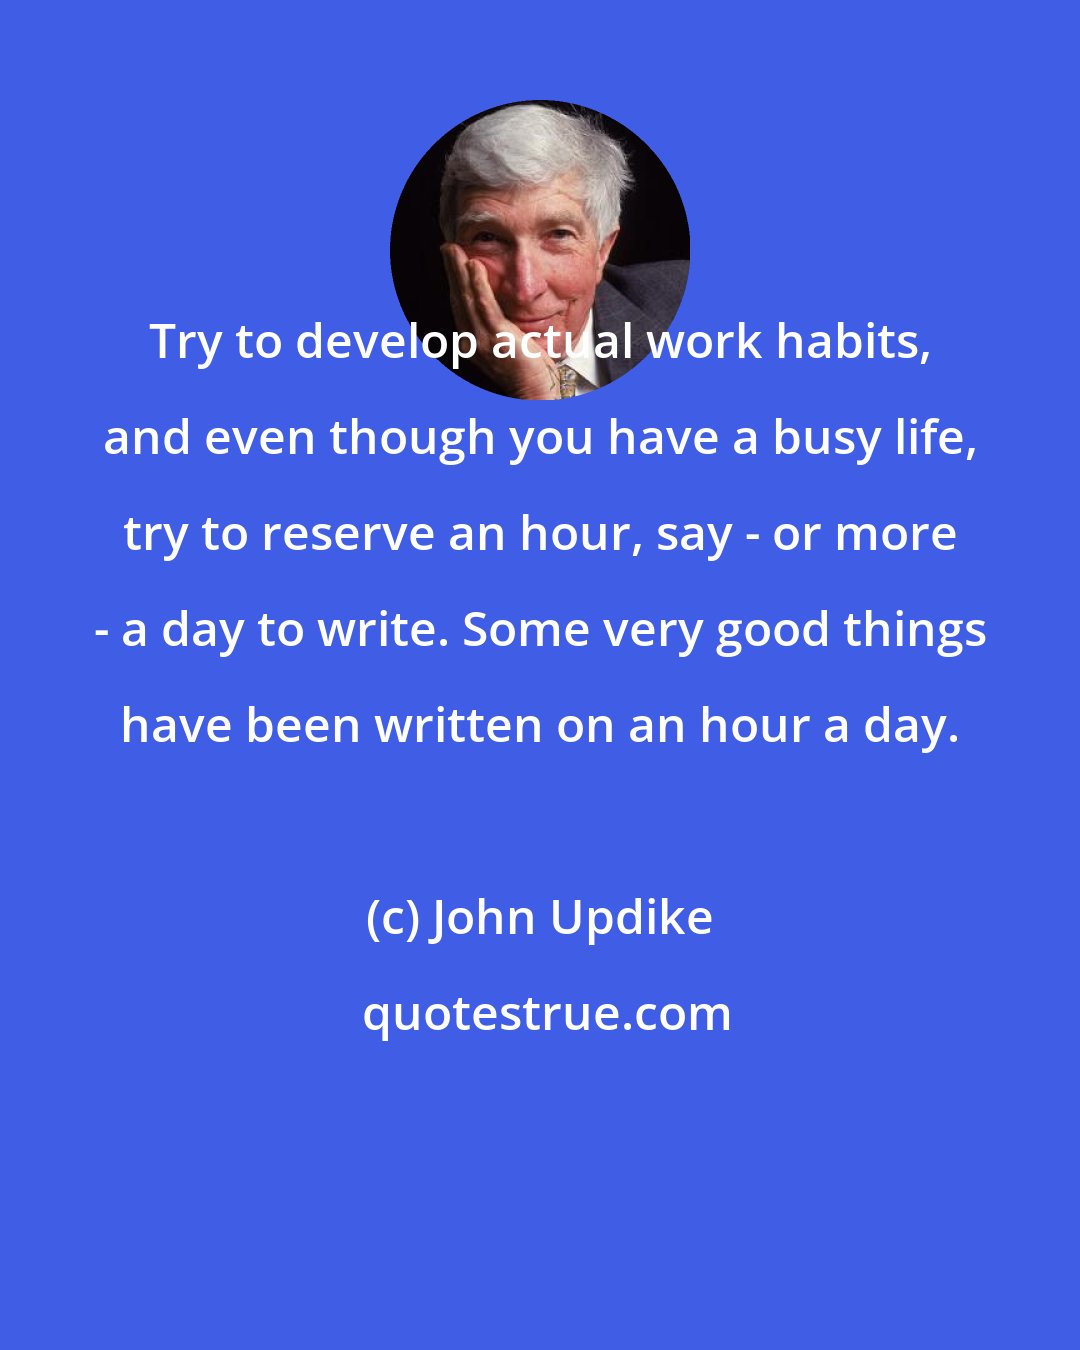 John Updike: Try to develop actual work habits, and even though you have a busy life, try to reserve an hour, say - or more - a day to write. Some very good things have been written on an hour a day.